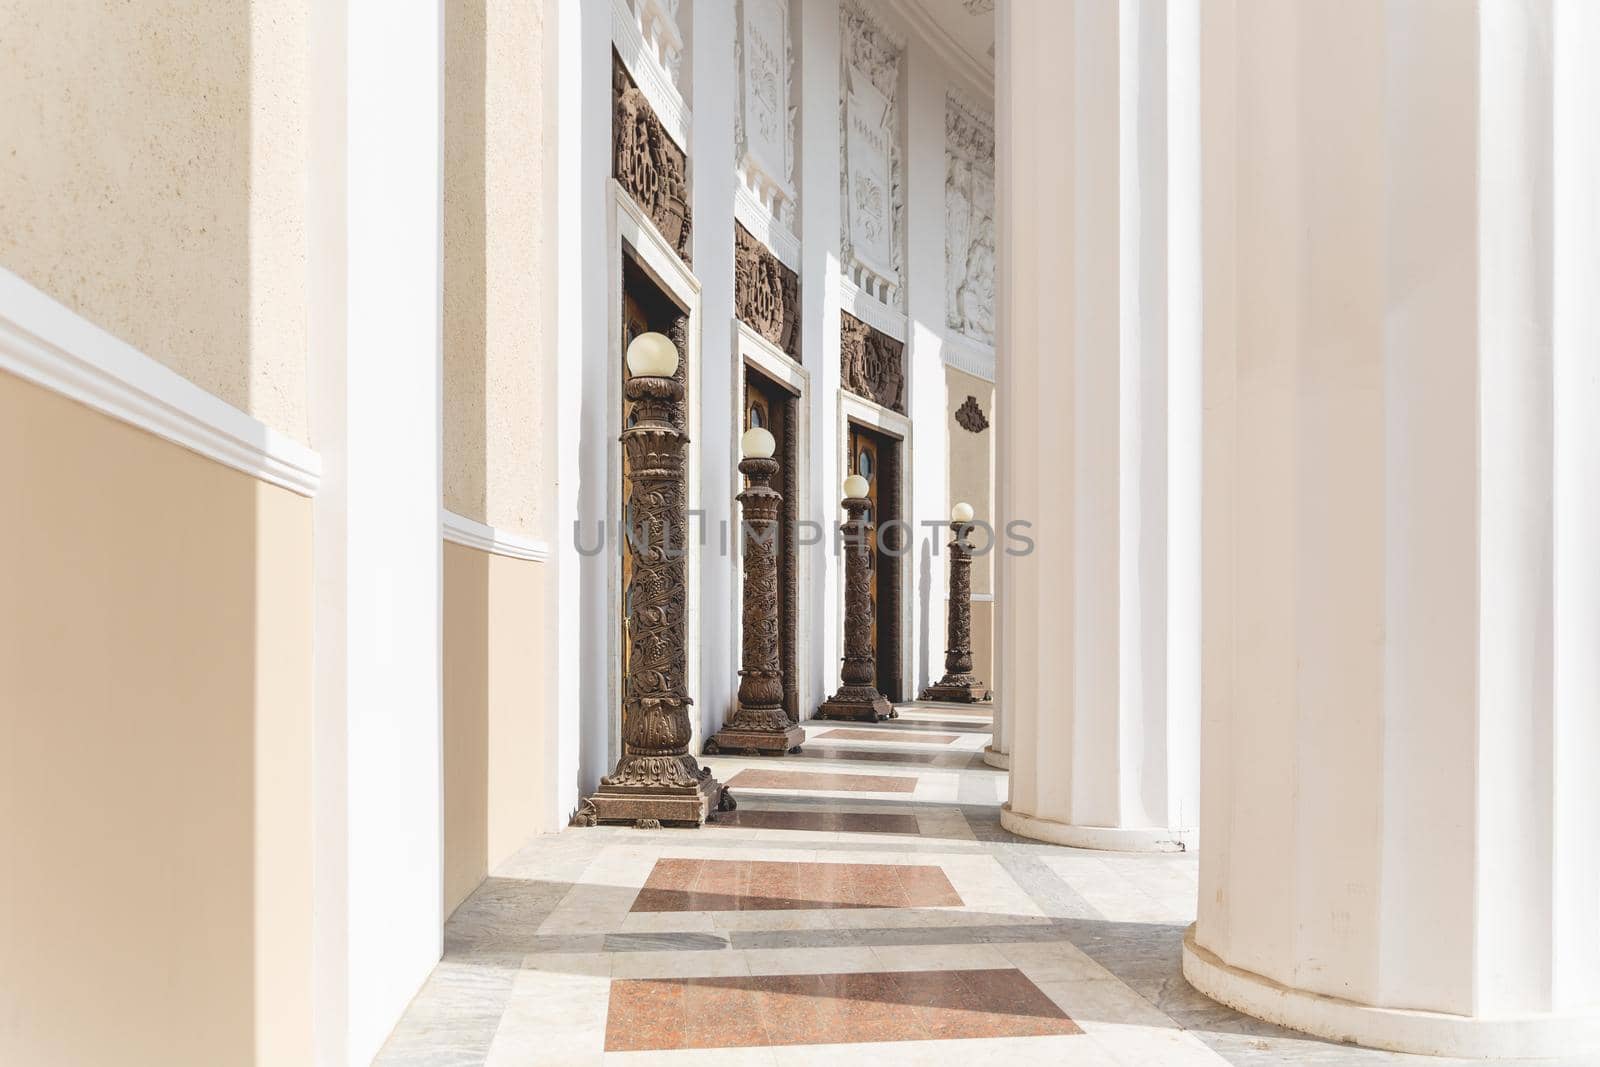 MOSCOW, RUSSIA - May 22, 2015. Architectural ornamental columns and wooden doors of entrance in Main Pavilion. VDNH or Exhibition of Achievements of National Economy.